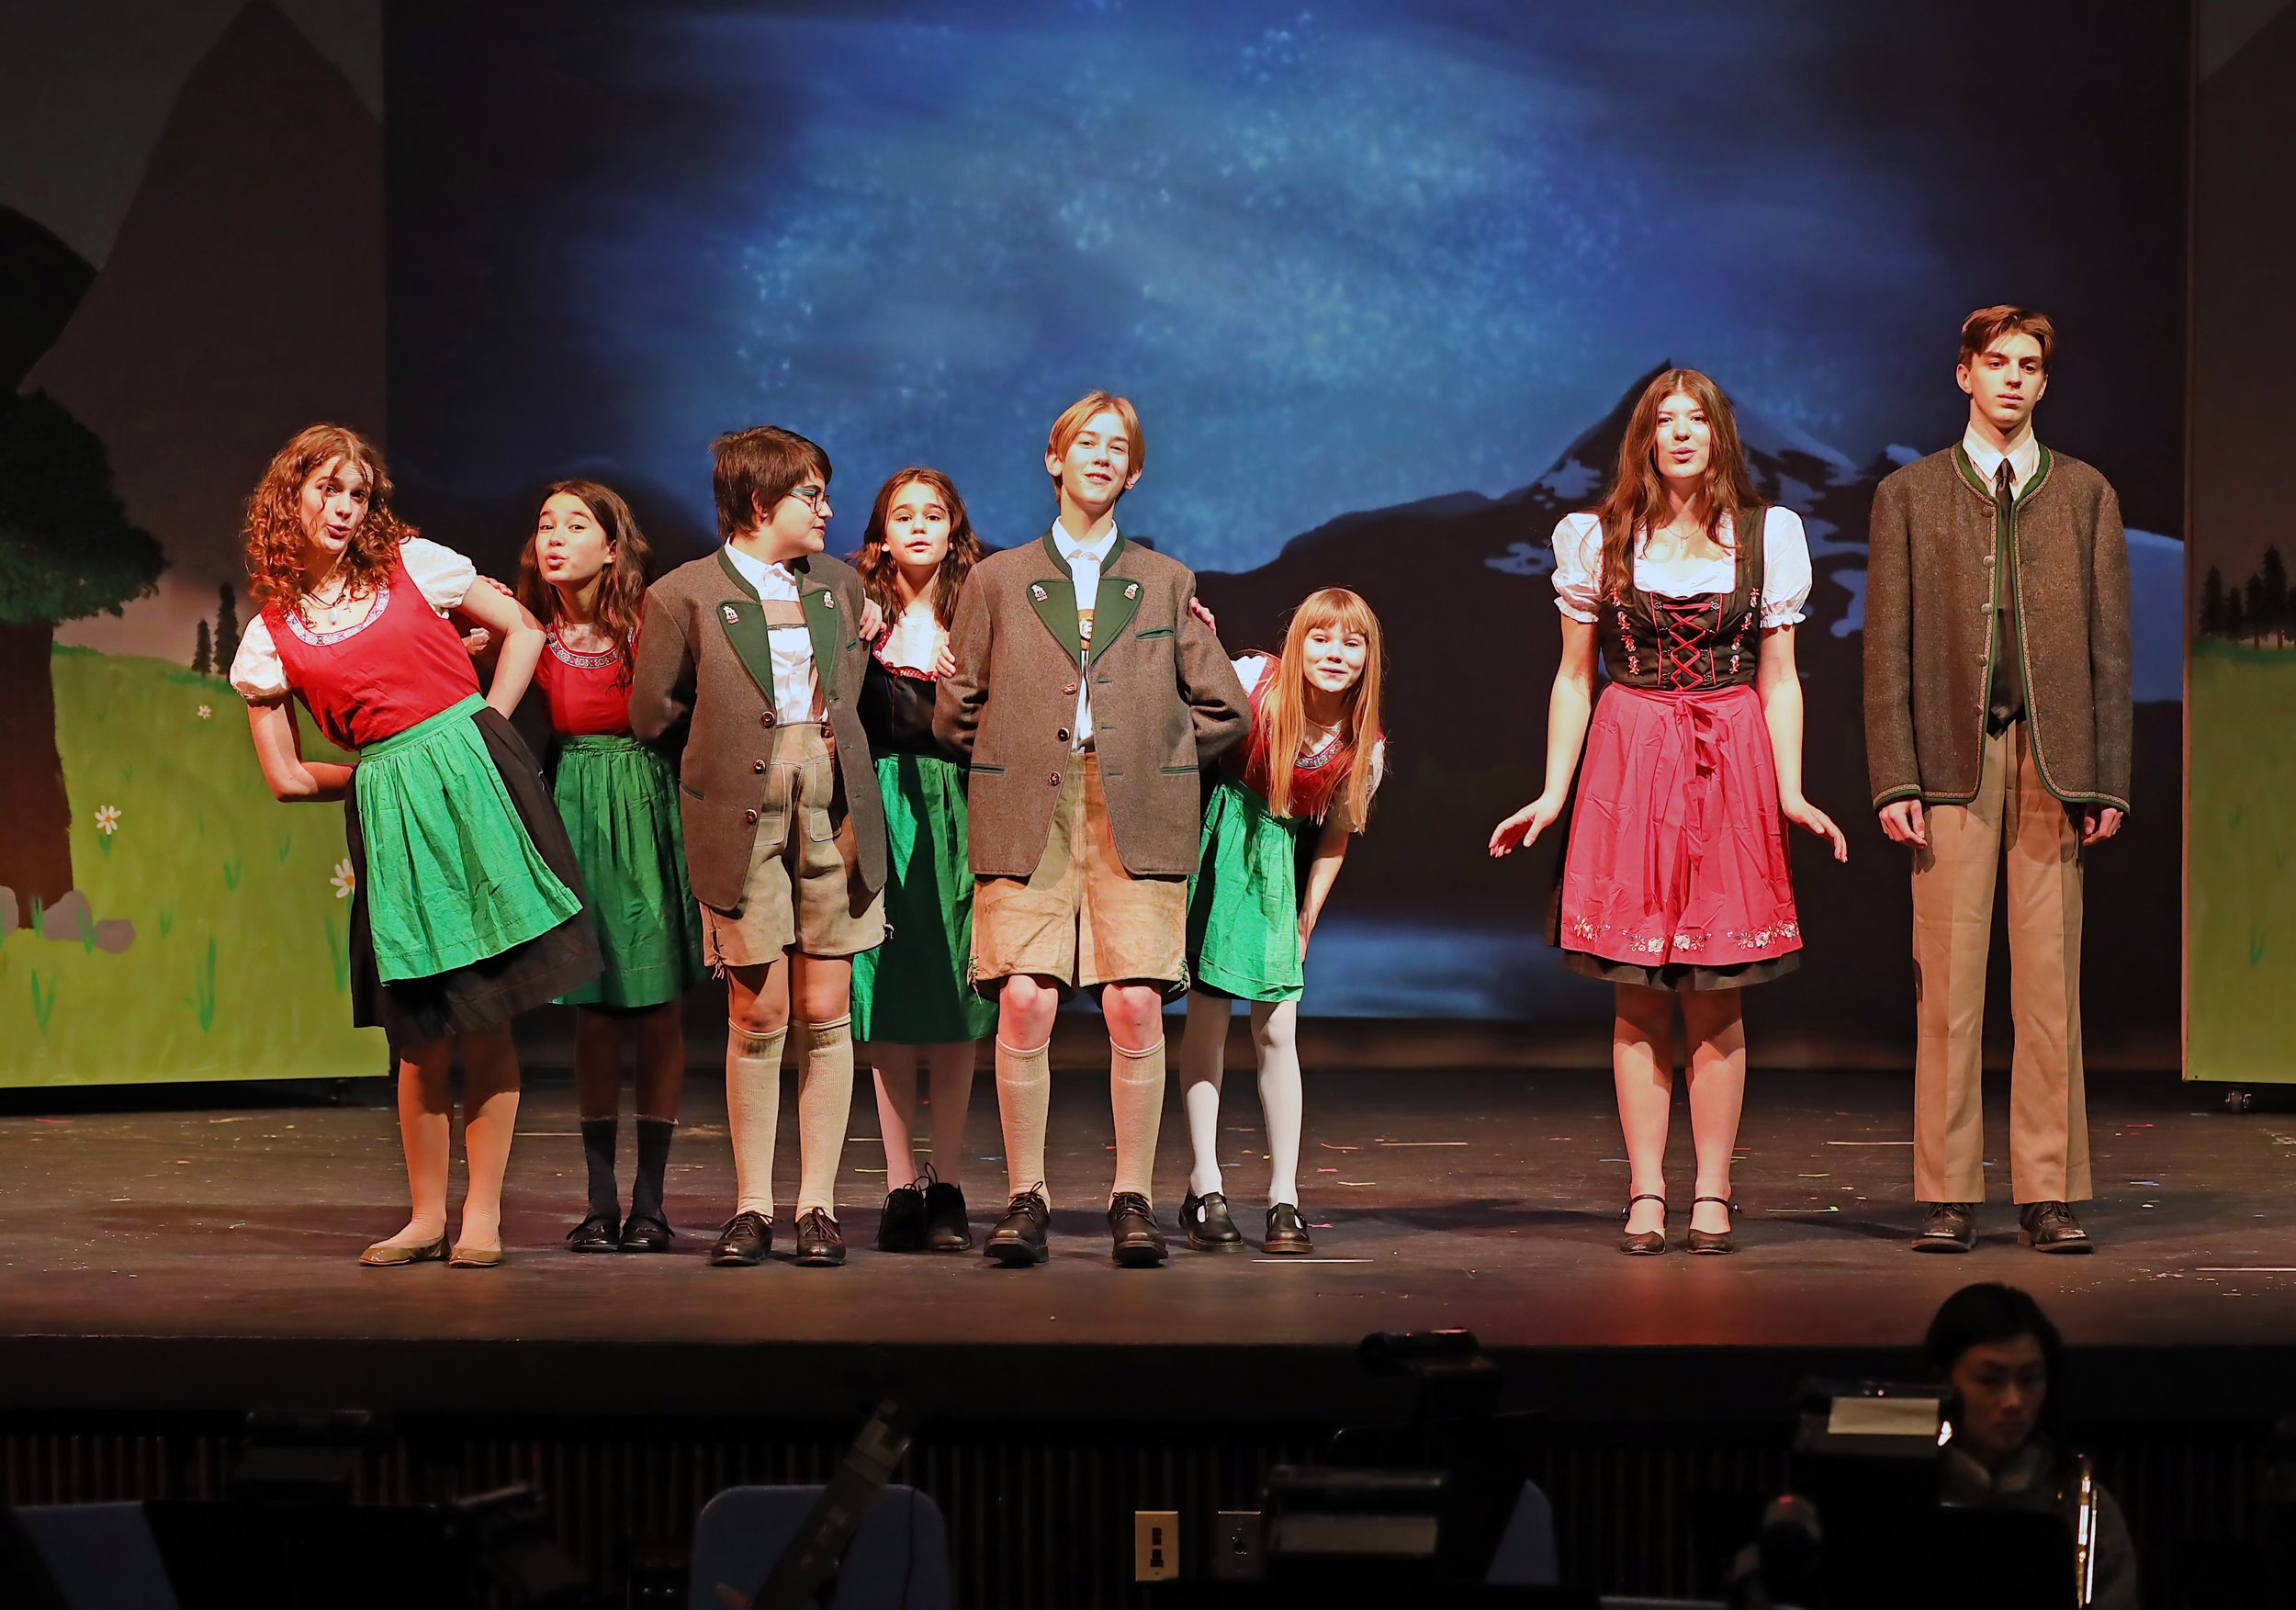   Harwood high school cast members Zoe Blackman (far left); Abby Holter and Christopher Cummisky (on right) rehearse with middle school actors (middle, left to right) Harmony Devoe, Robin Weigand, Ari Weigand, Tarin Askew and Desi Dahlgren. Photo by 